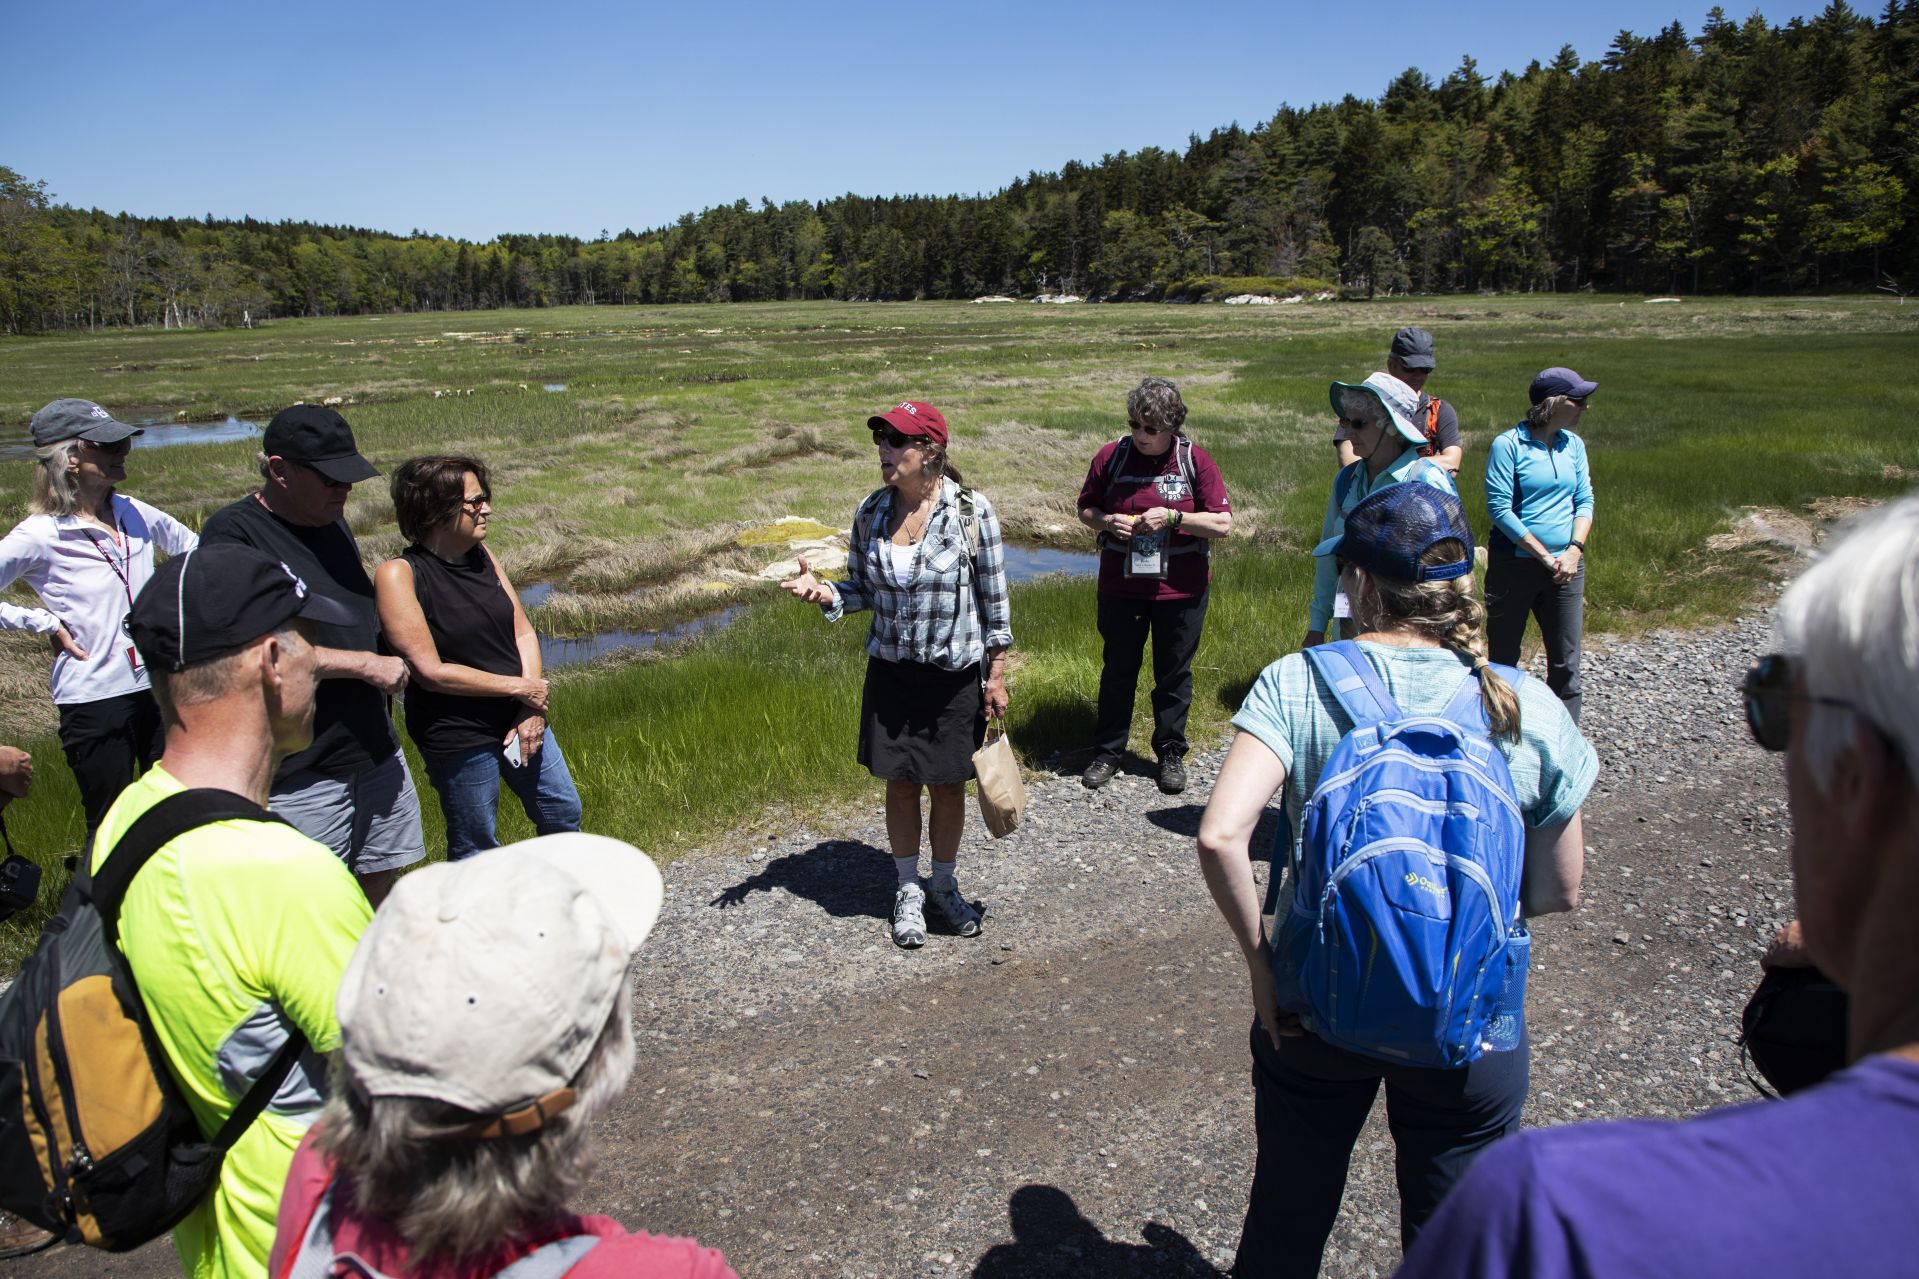 Moments from the Outing Club: Coastal Hike at Bates-Morse Mountain Conservation Area on June 7, 2019. Bates Conservation Area Director Laura Sewall and former director Judy Marden ’66 led a four-mile hike through the natural communities and varied terrains to Seawall Beach. Bates manages this resource for research and educational purposes and is conducting environmental research throughout the area.